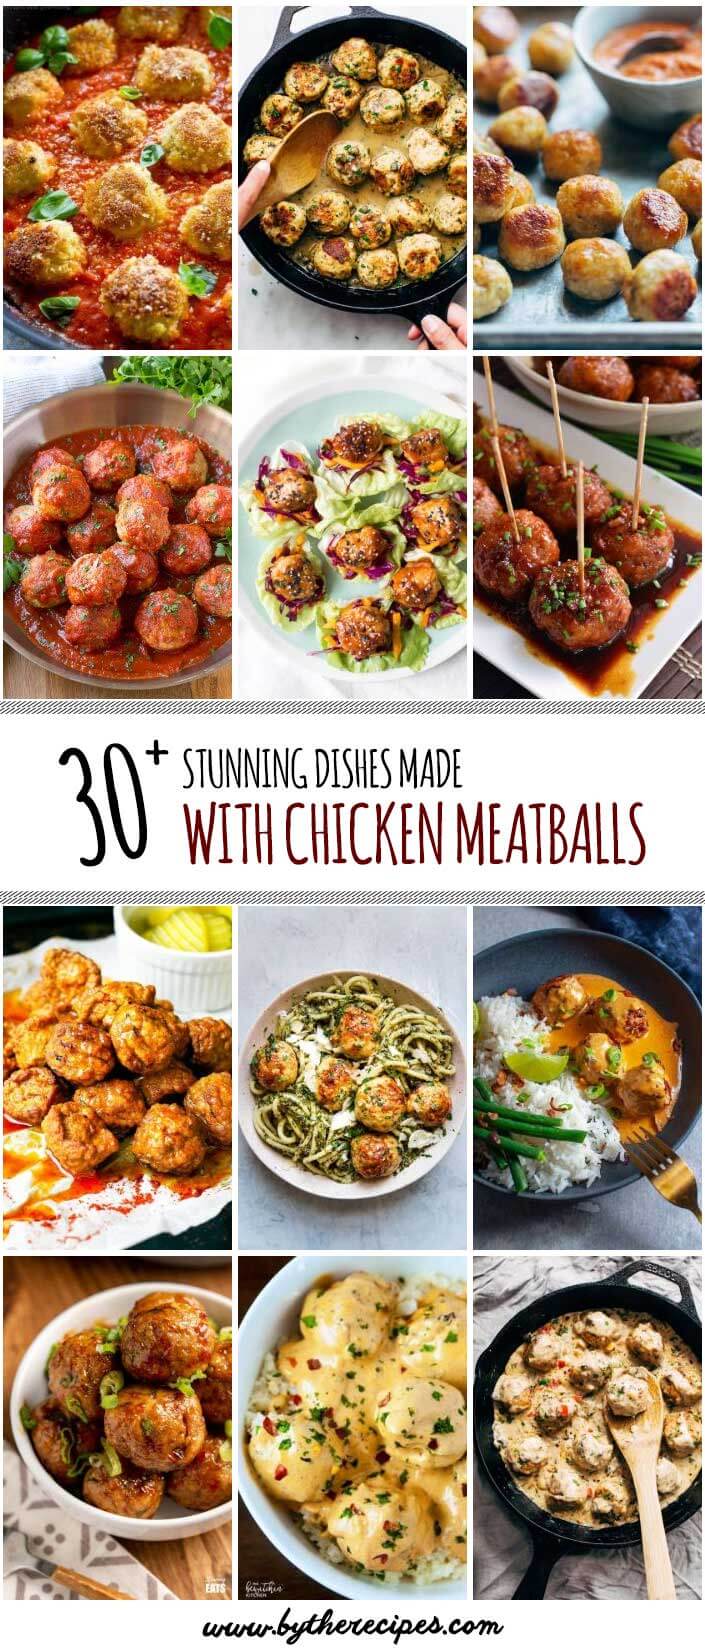 30 Stunning Dishes Made with Chicken Meatballs